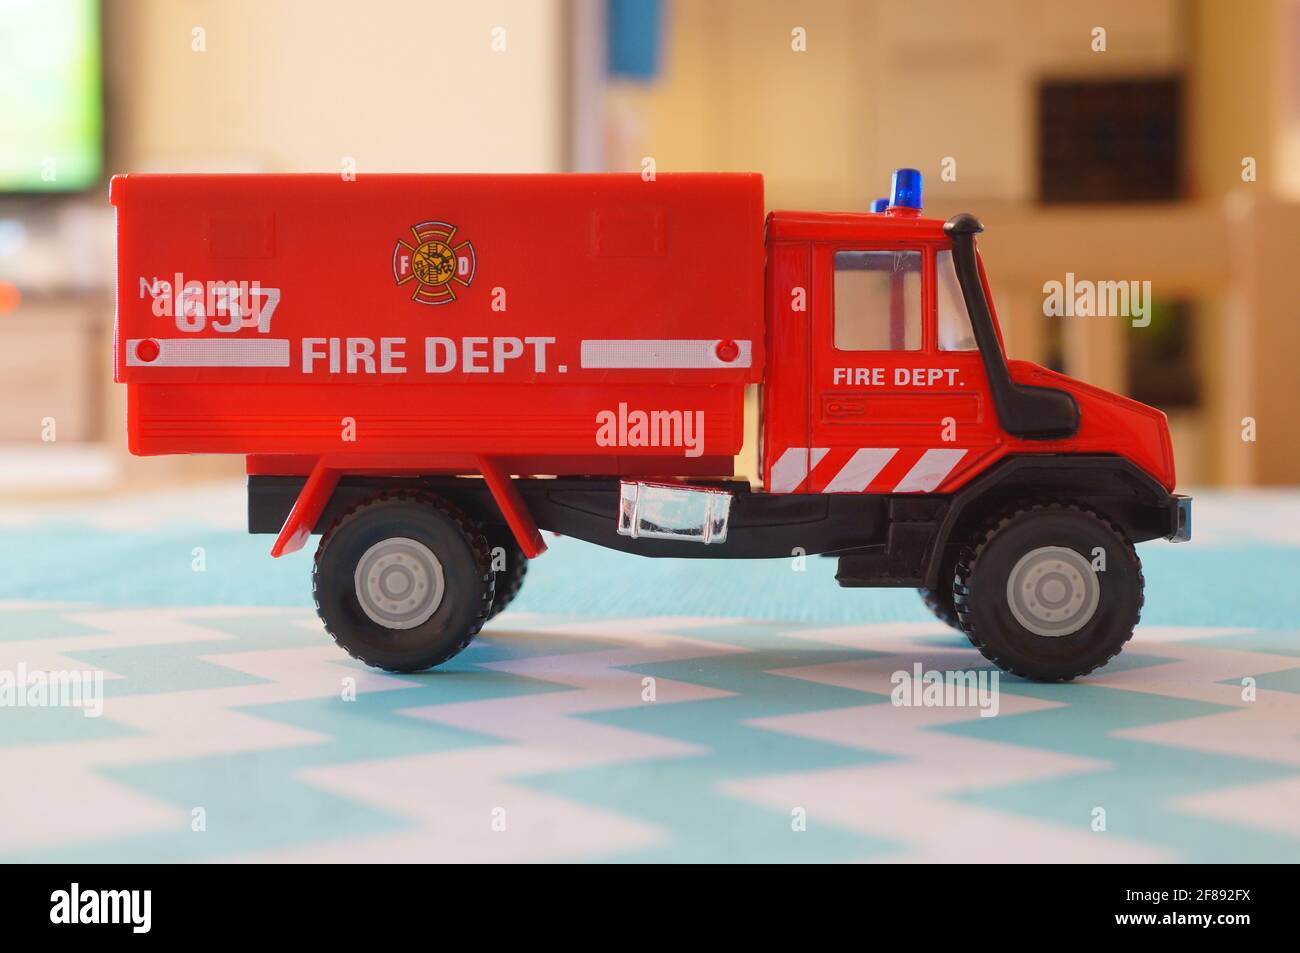 POZNAN, POLAND - Feb 19, 2017: Red Welly toy fire department truck on table in soft focus Stock Photo